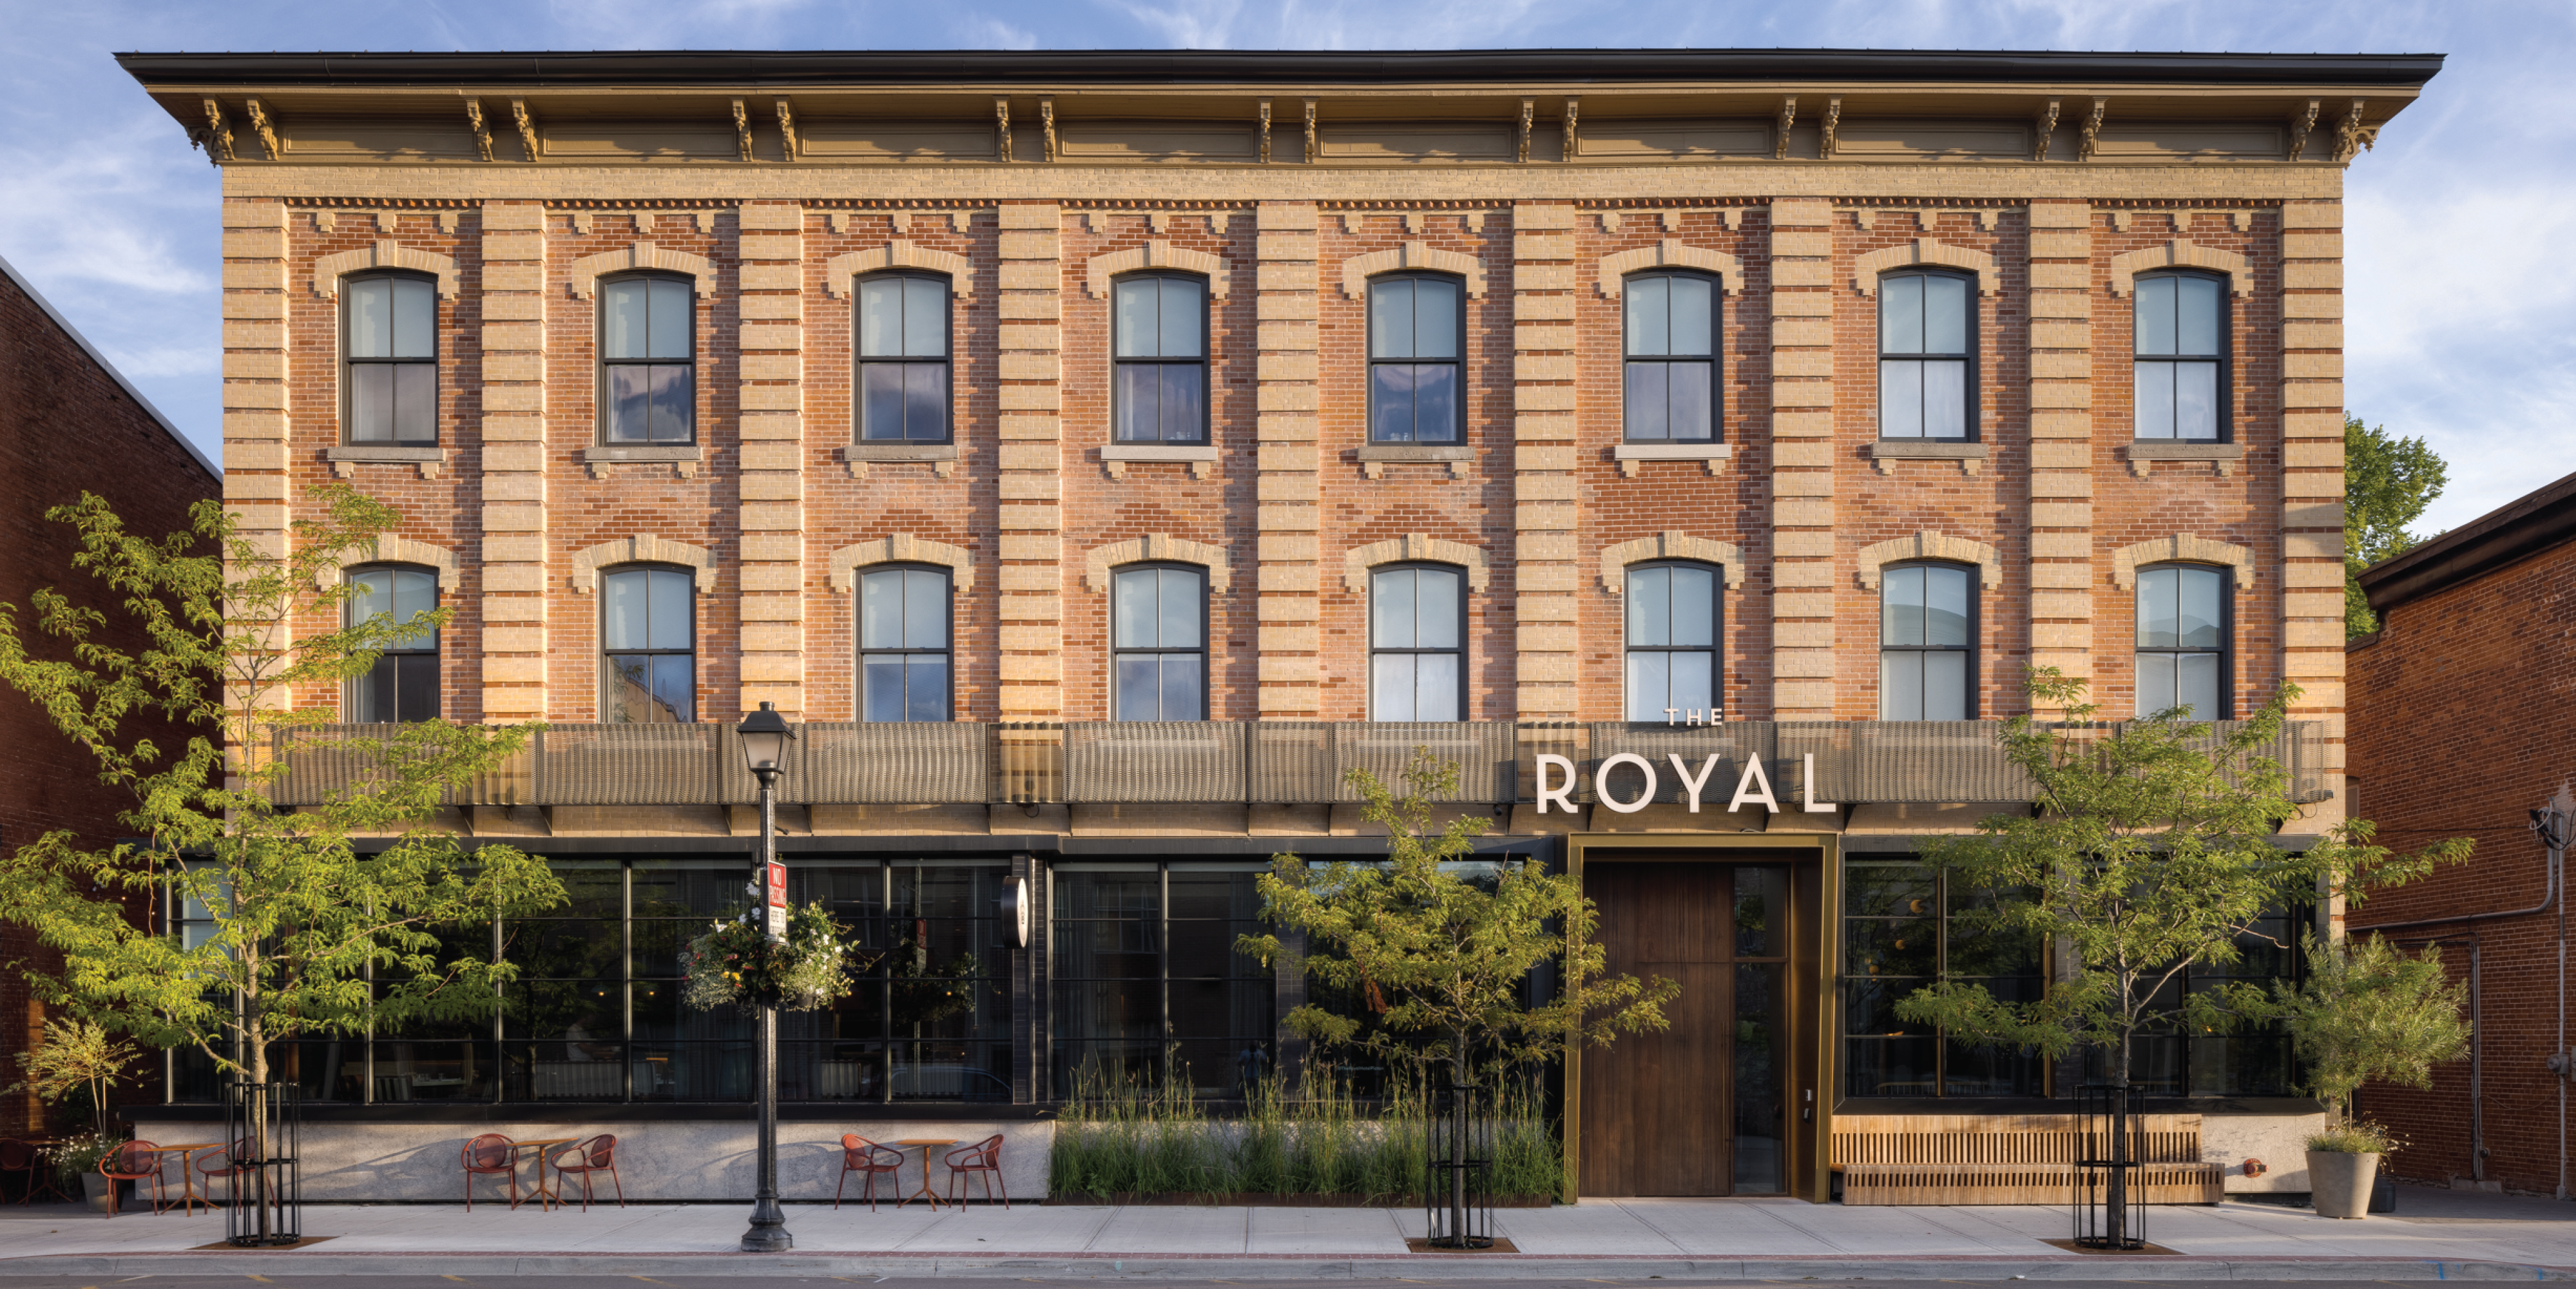 The Royal Hotel front facade during the day